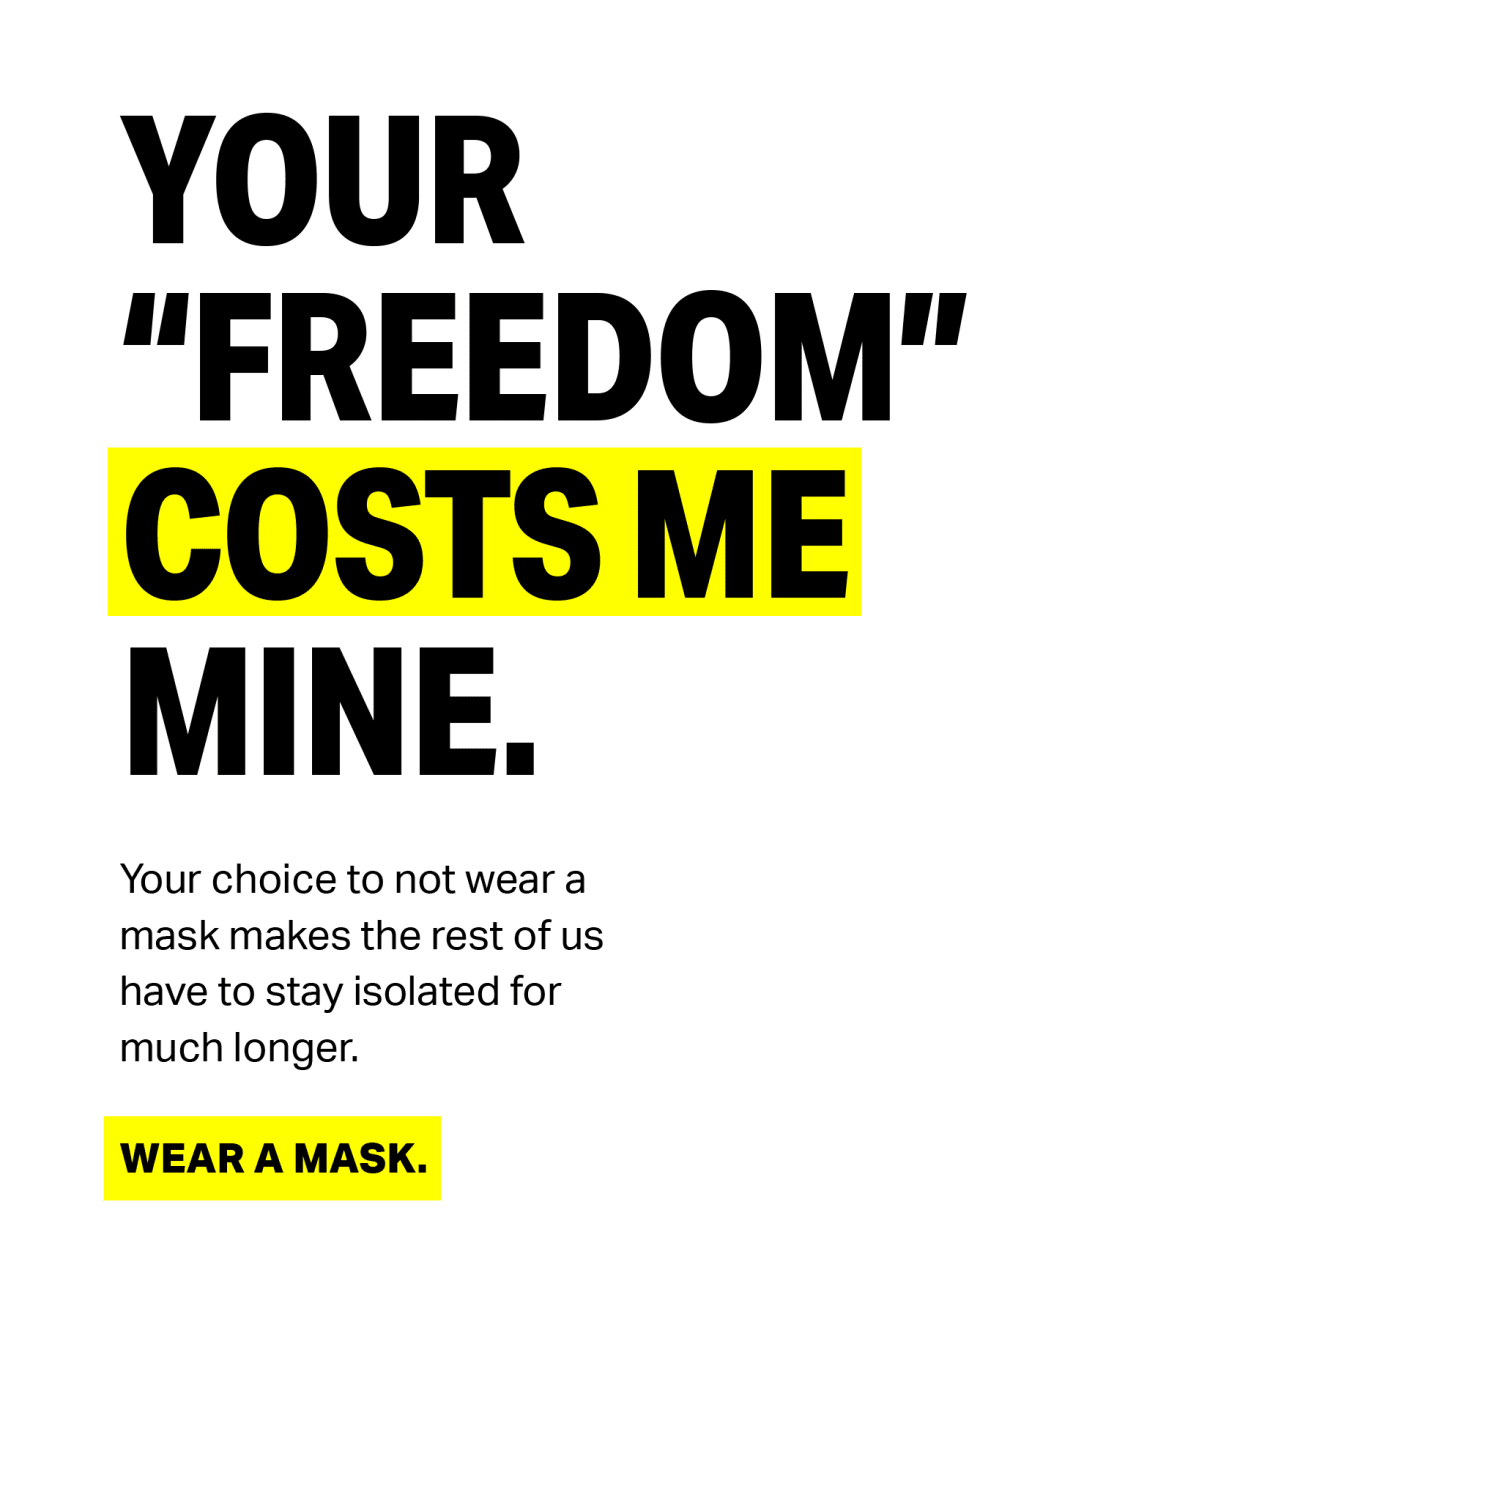 Your “Freedom” costs me mine. A social media poster.